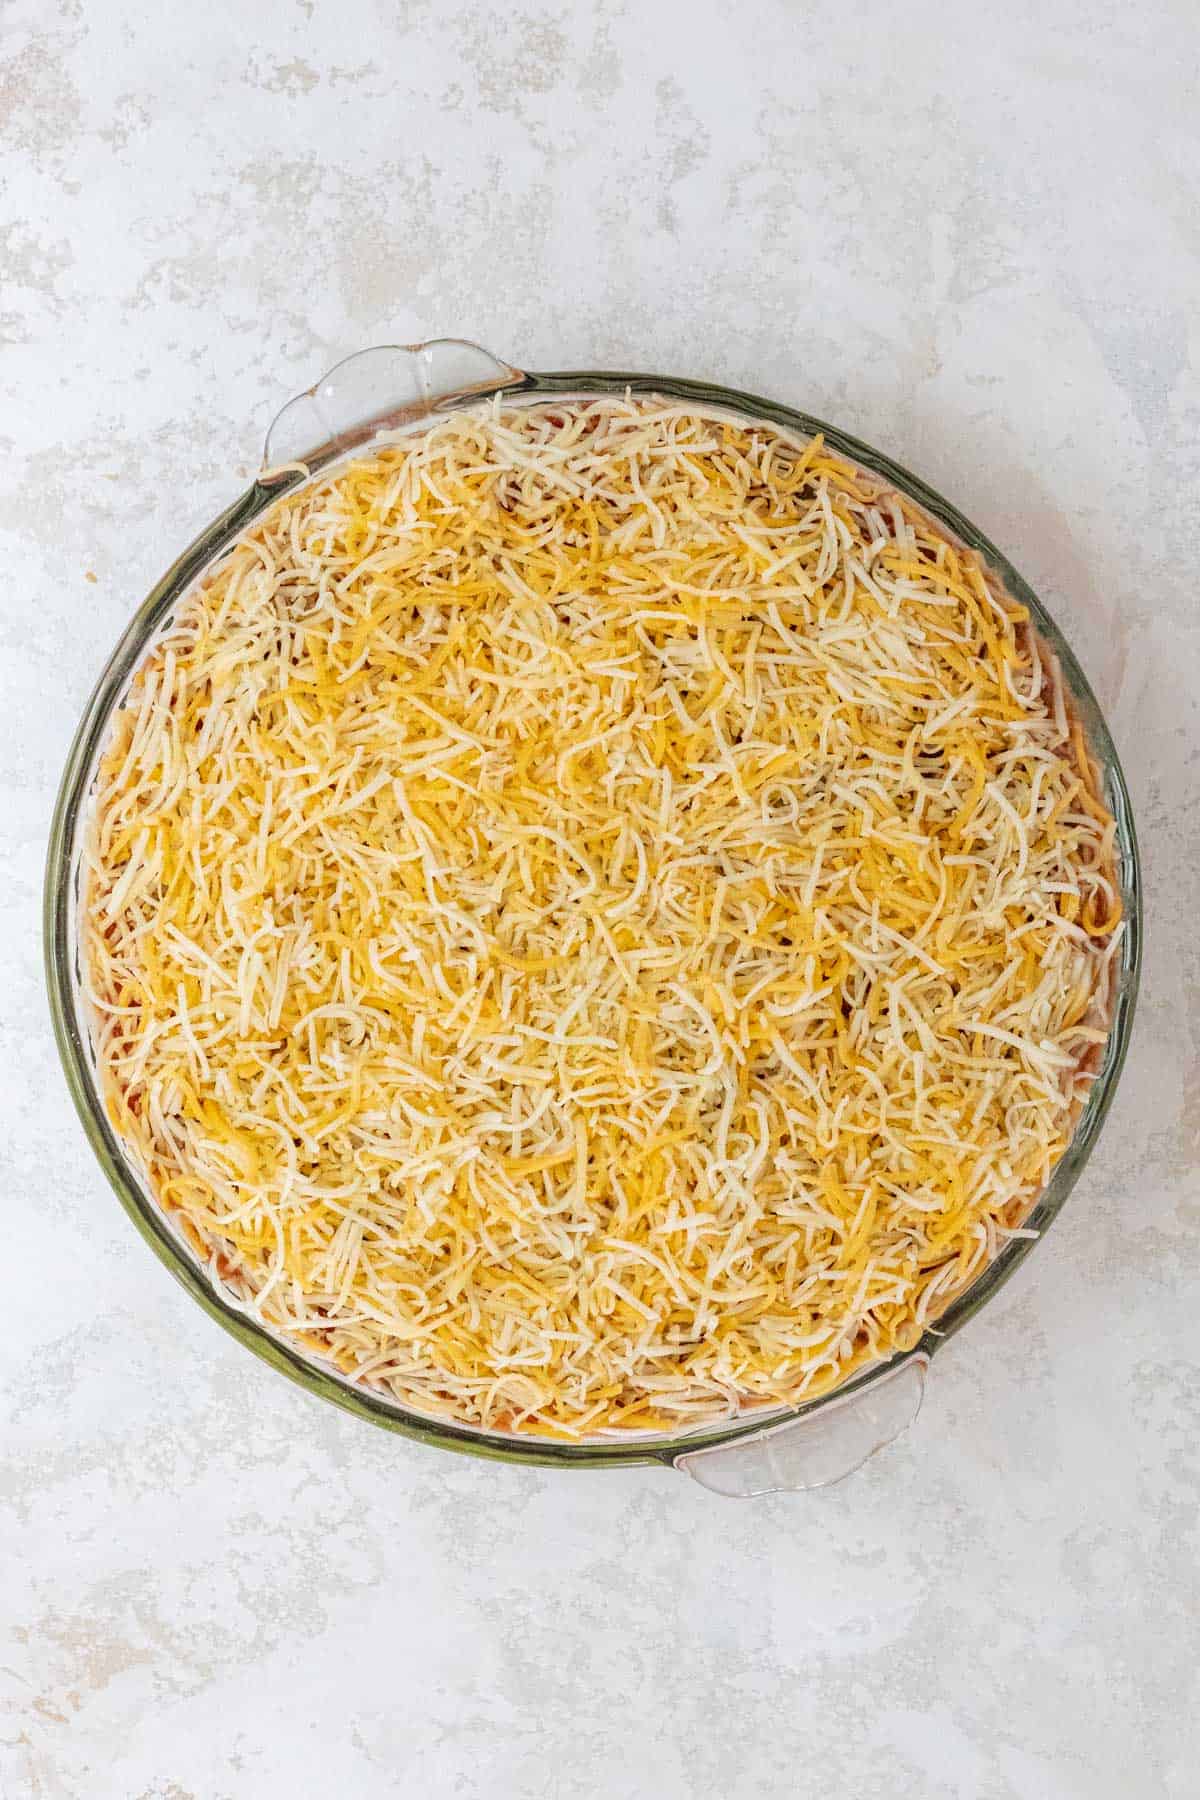 Shredded Mexican cheese sprinkled over the salsa in a large pie dish.